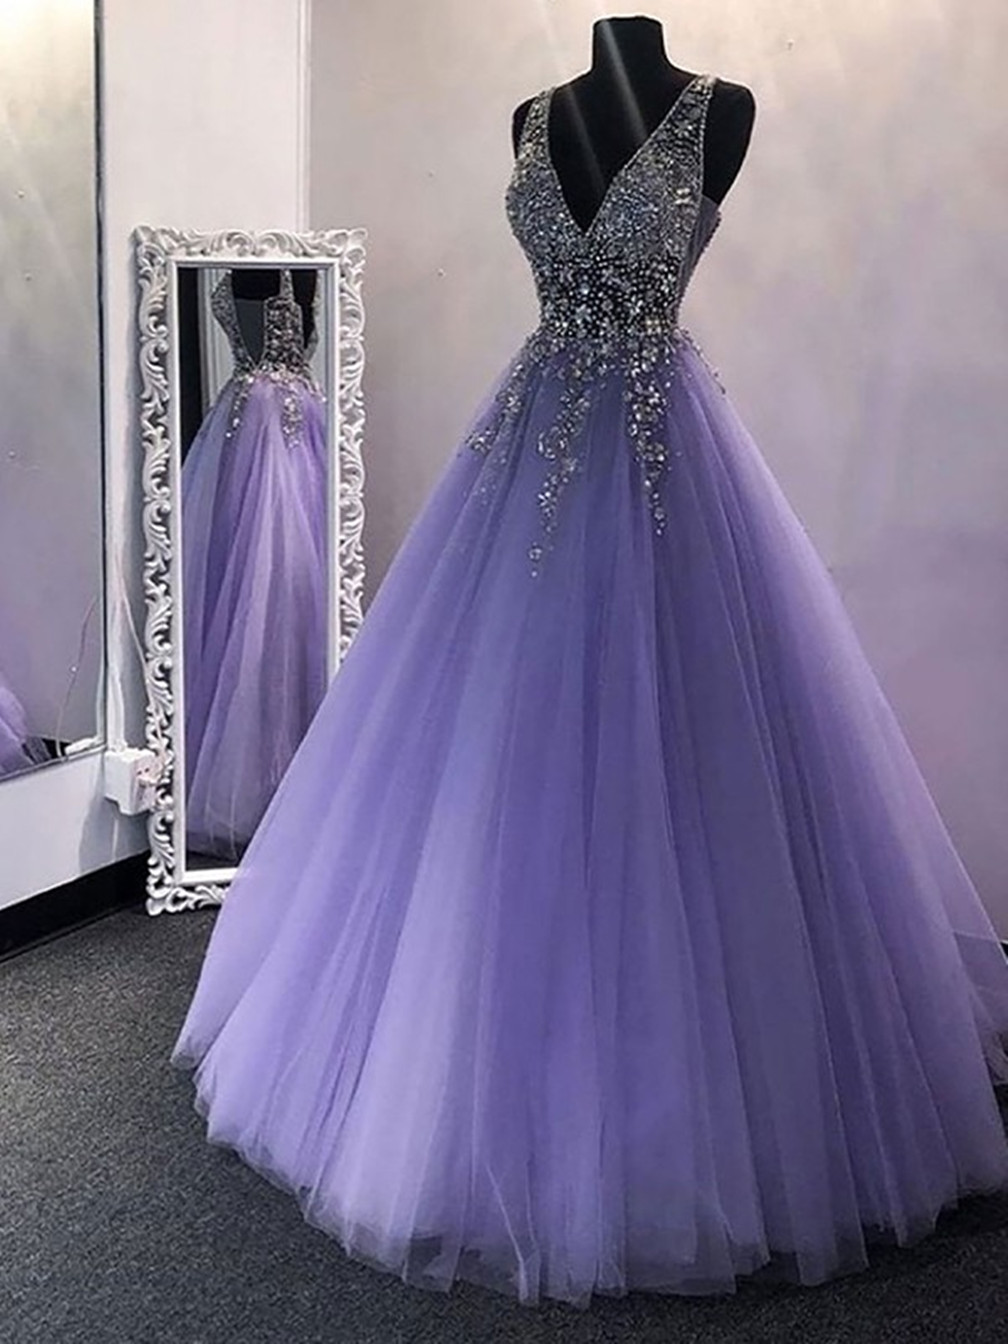 Women A-line/princess Tulle Beading Prom Dresses Long Sleeveless Evening Gowns V-neck Formal Party Dress Yp033